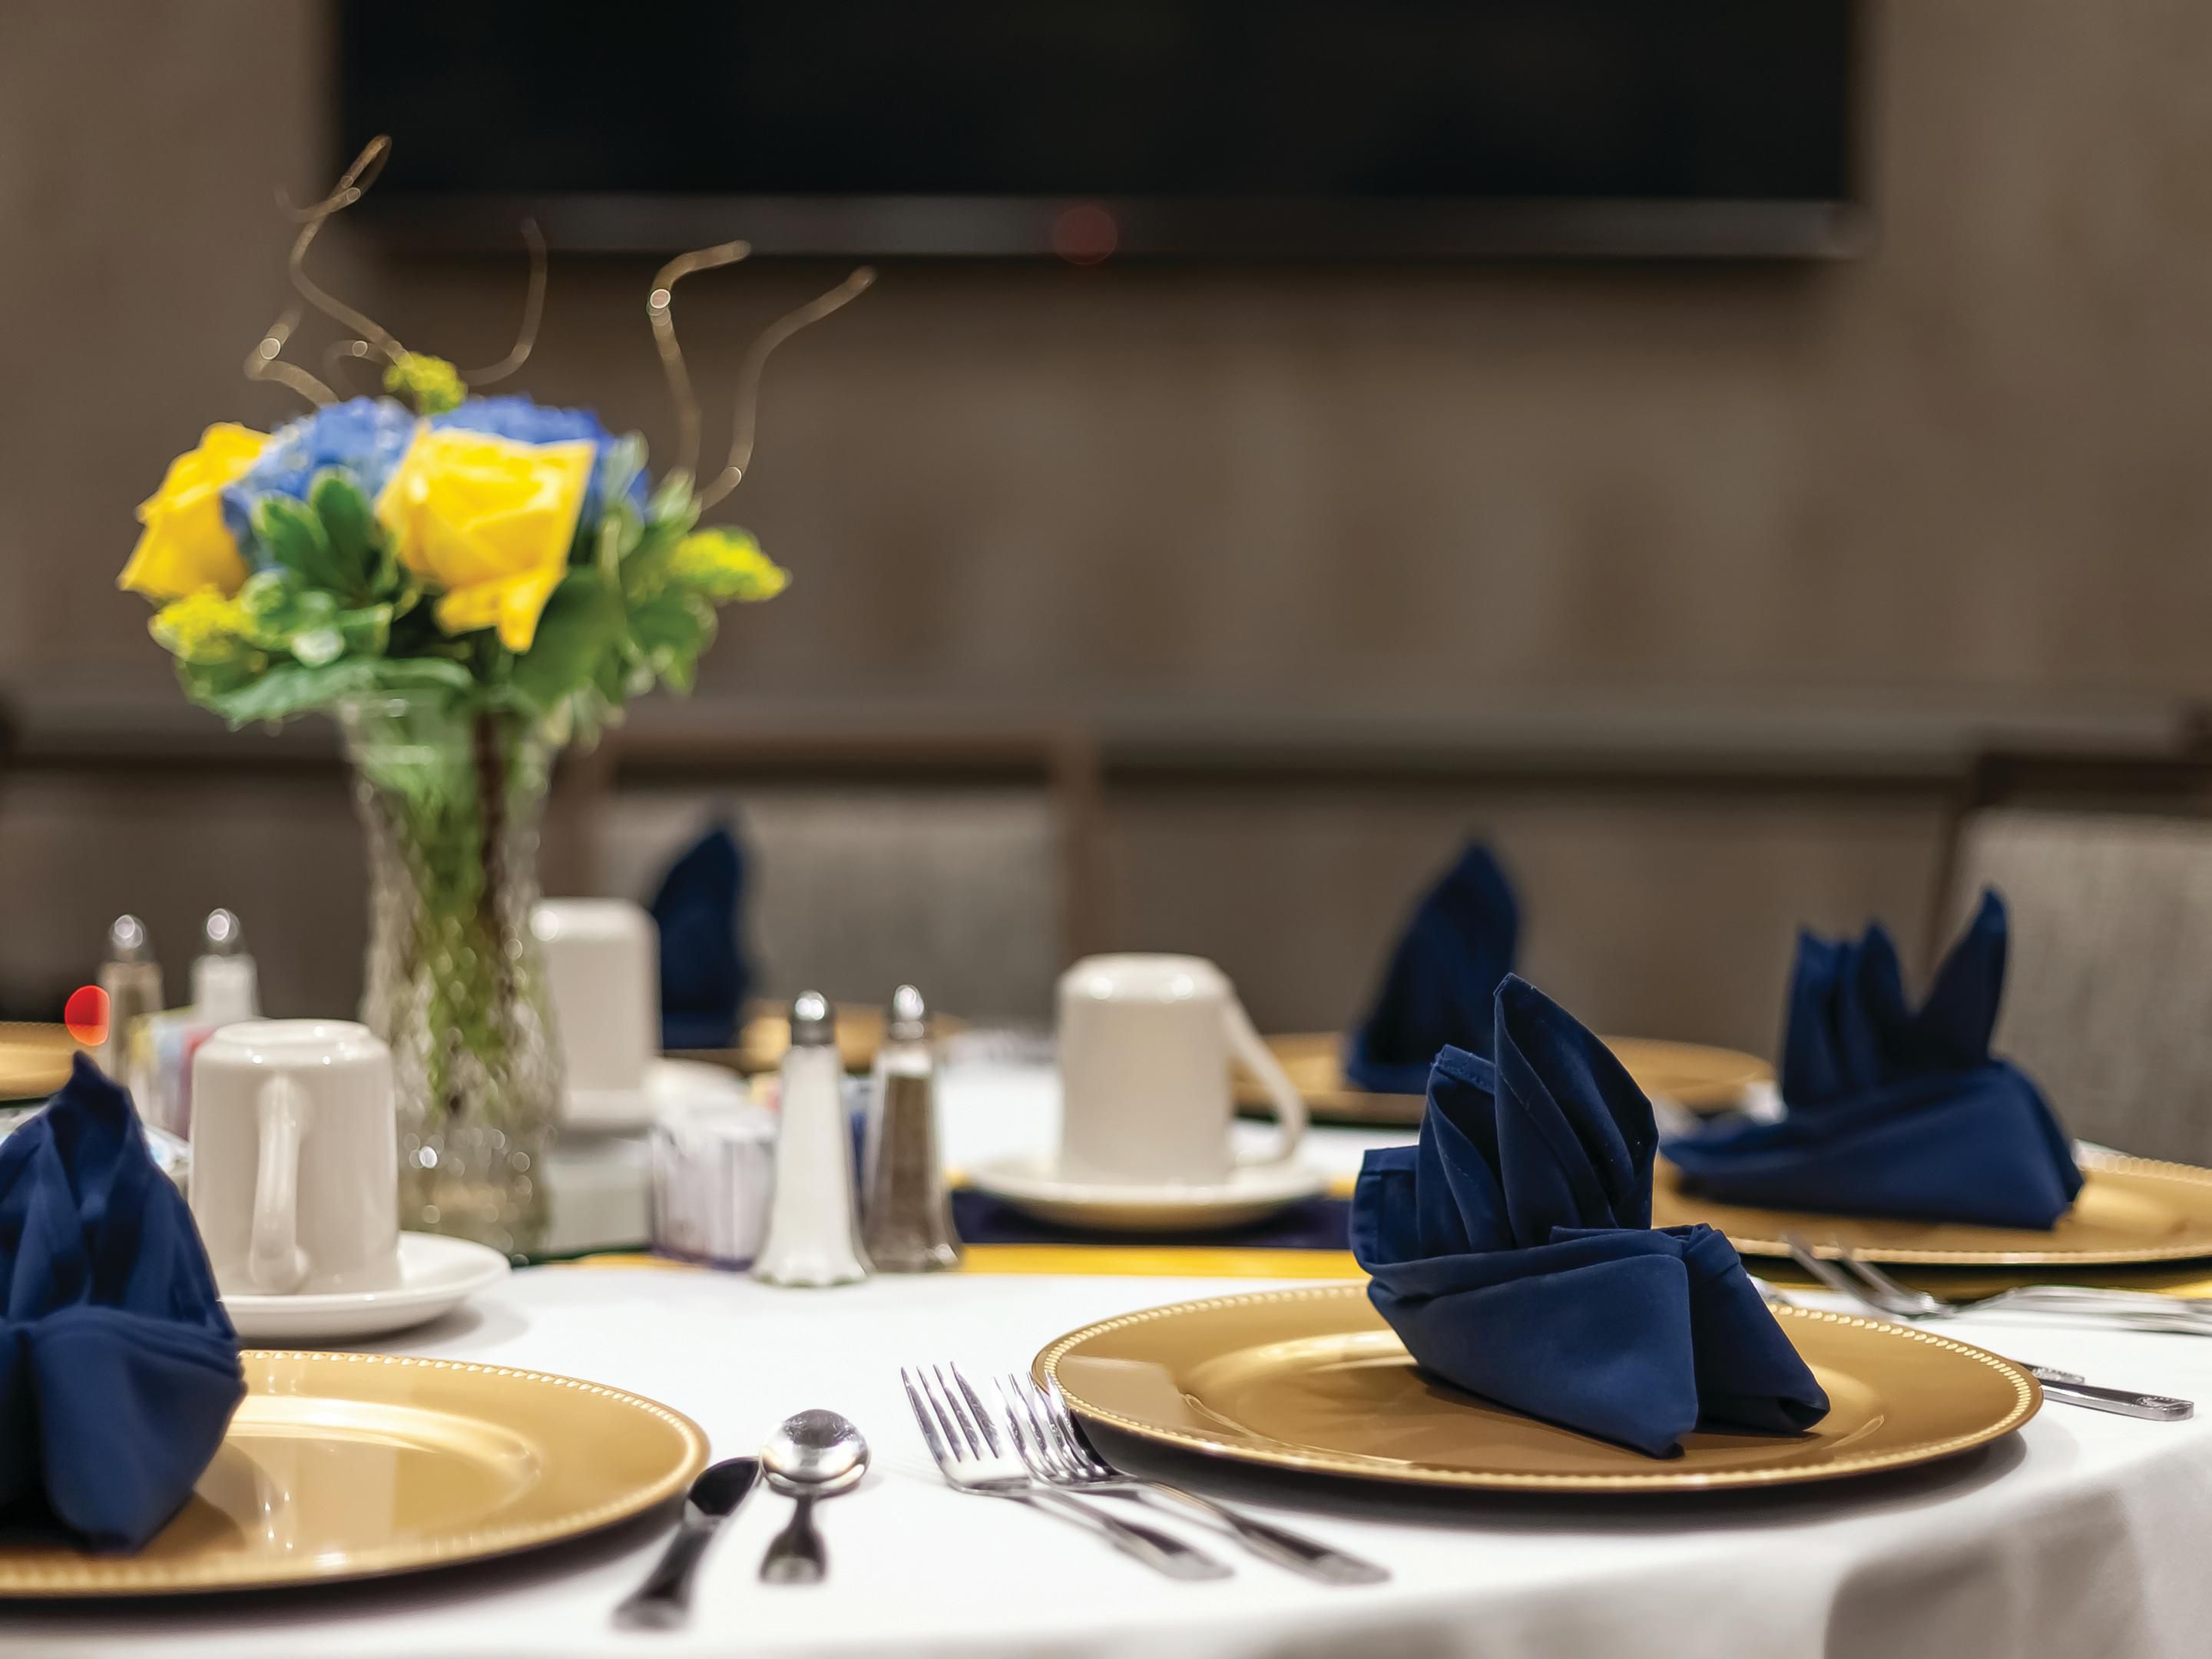 We offer several private event spaces for rental. On-site professional event planners help to coordinate your upcoming meeting or event - from the initial planning through the day of the occasion!